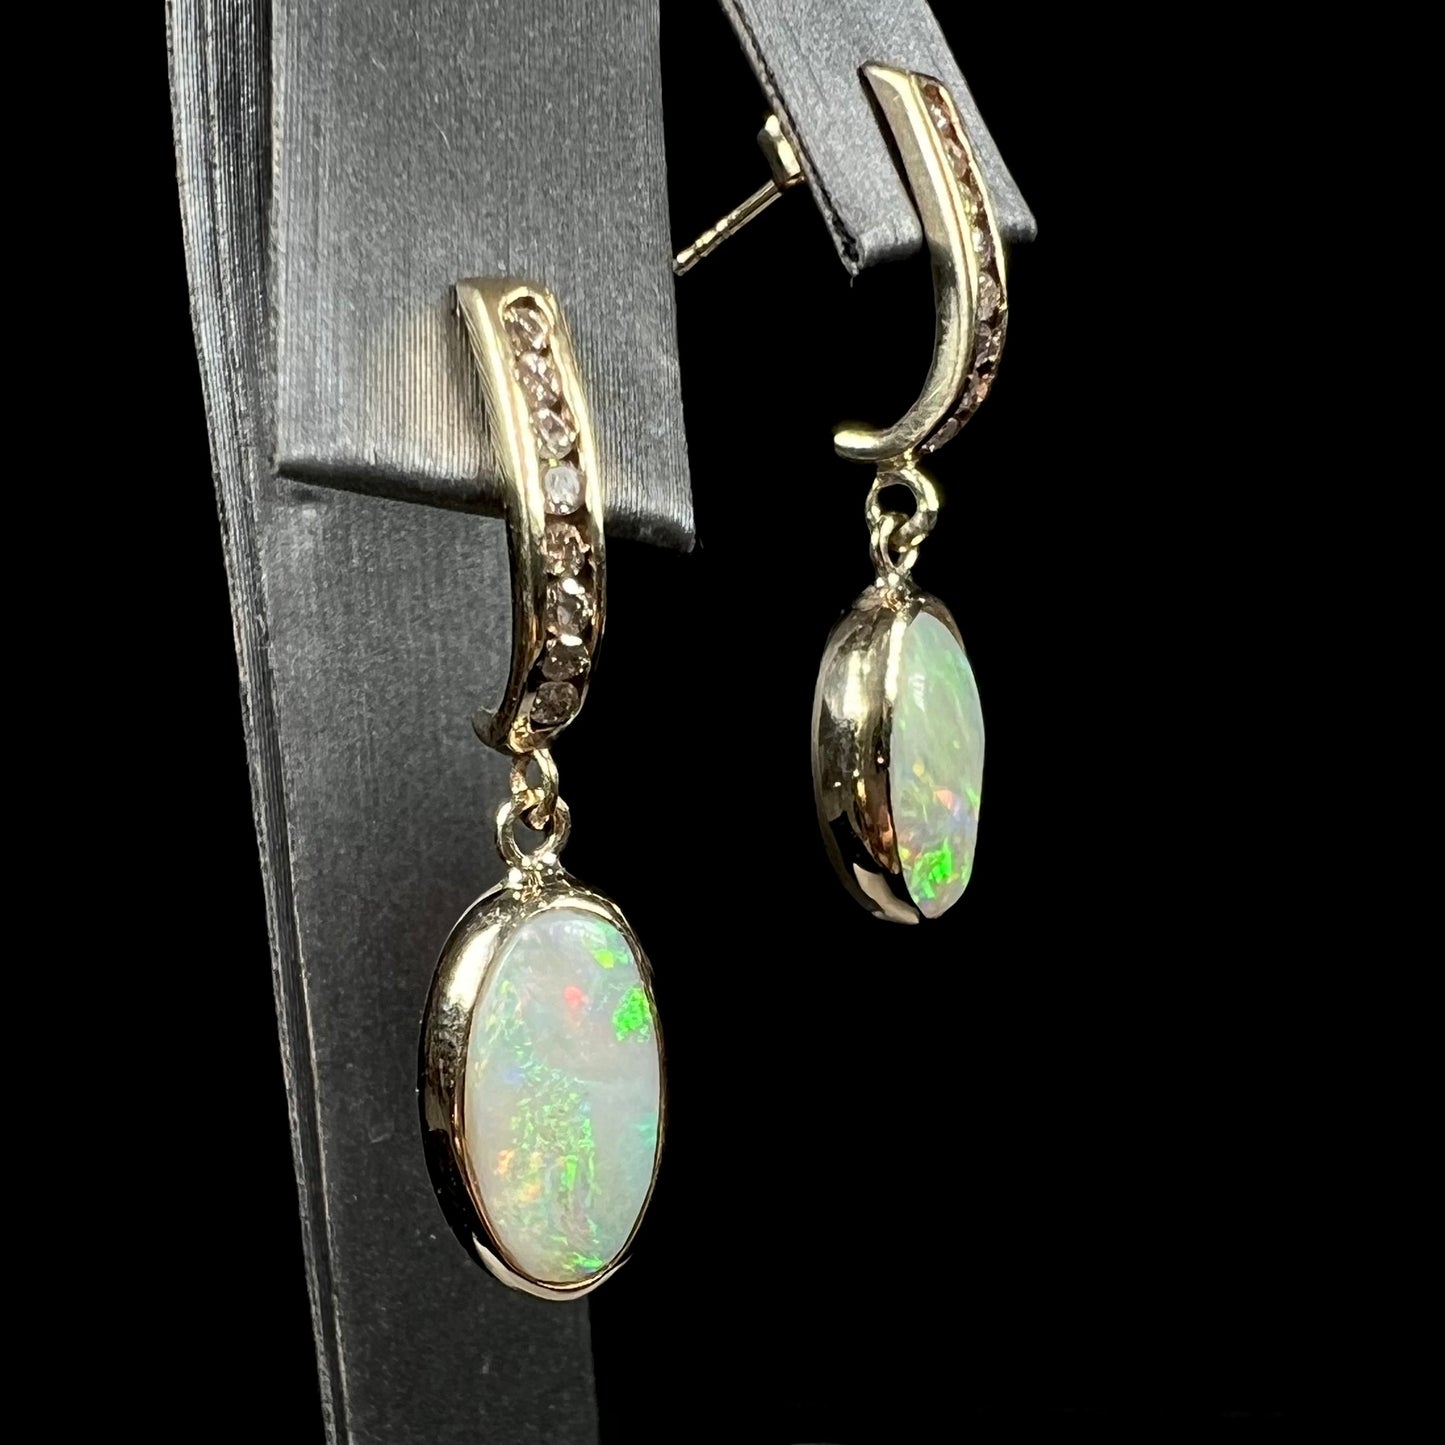 A pari of yellow gold dangle earrings set with natural white crystal opals and diamond accents.